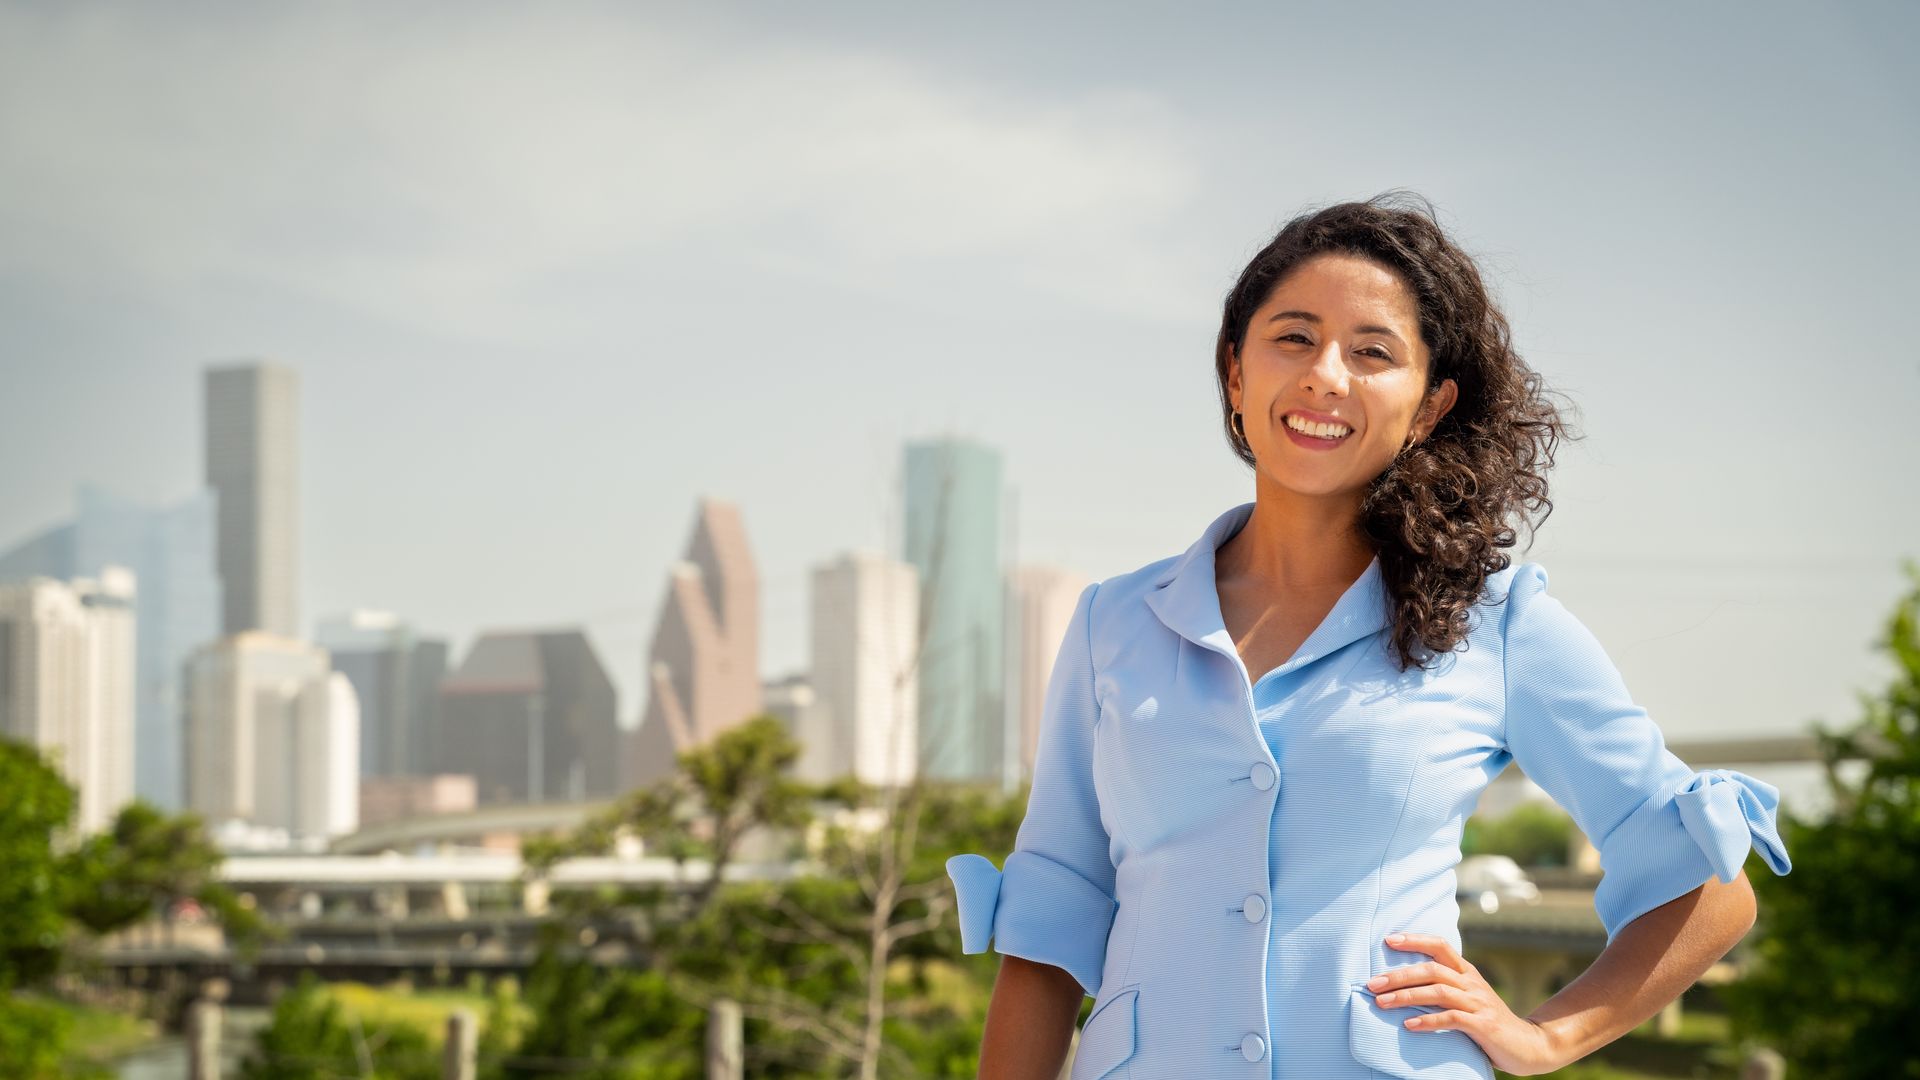 Harris County Judge Lina Hidaglo, in blue, smiles with the Houston skyline in the background